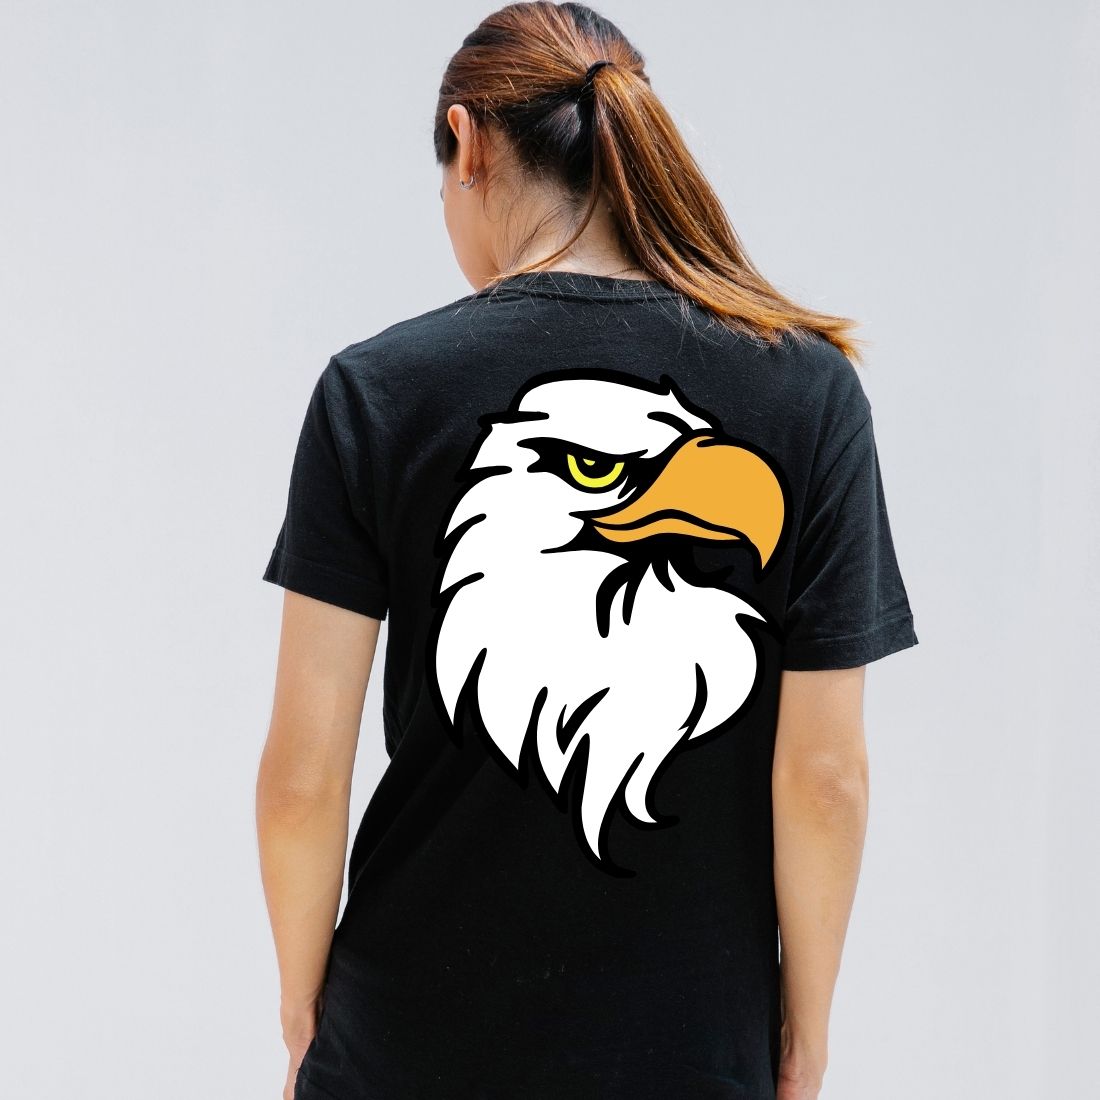 Eagle Face T-shirt Design Vector cover image.